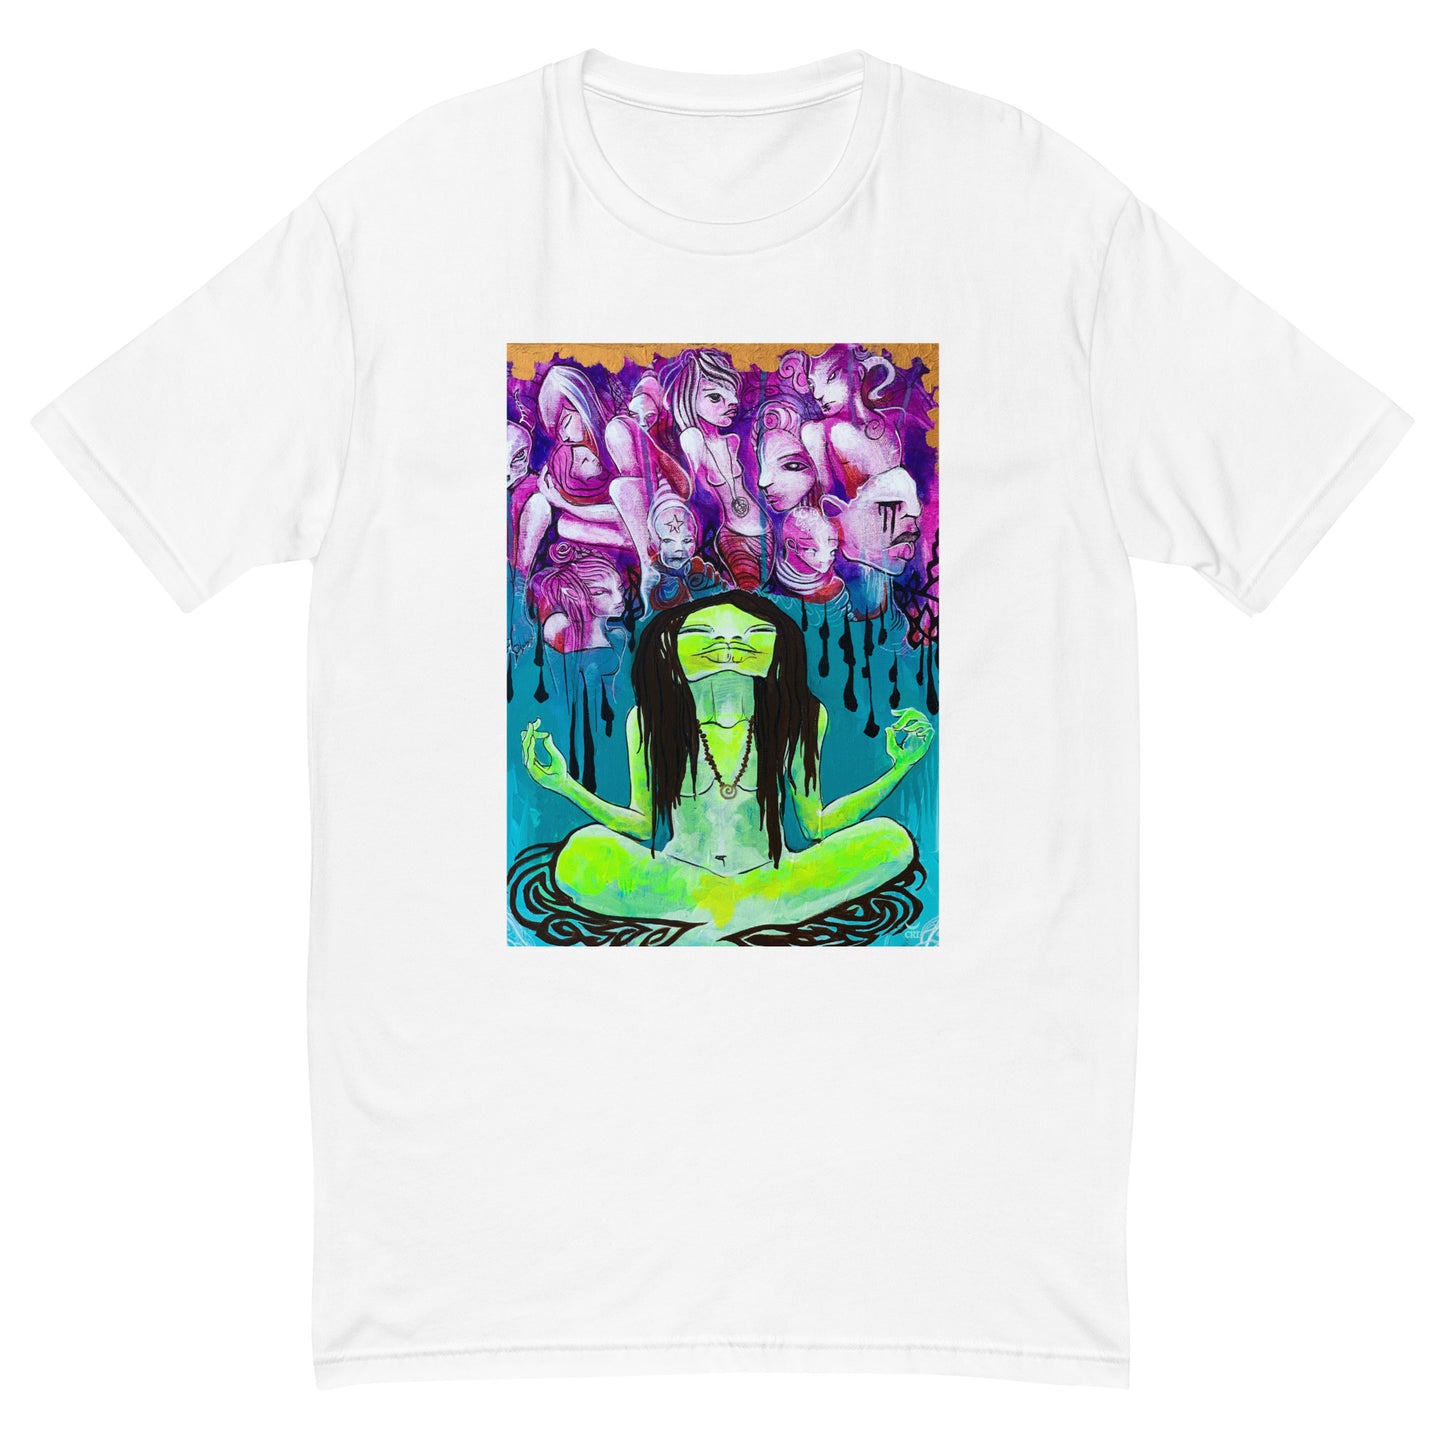 Meditation - Men's fitted Tee